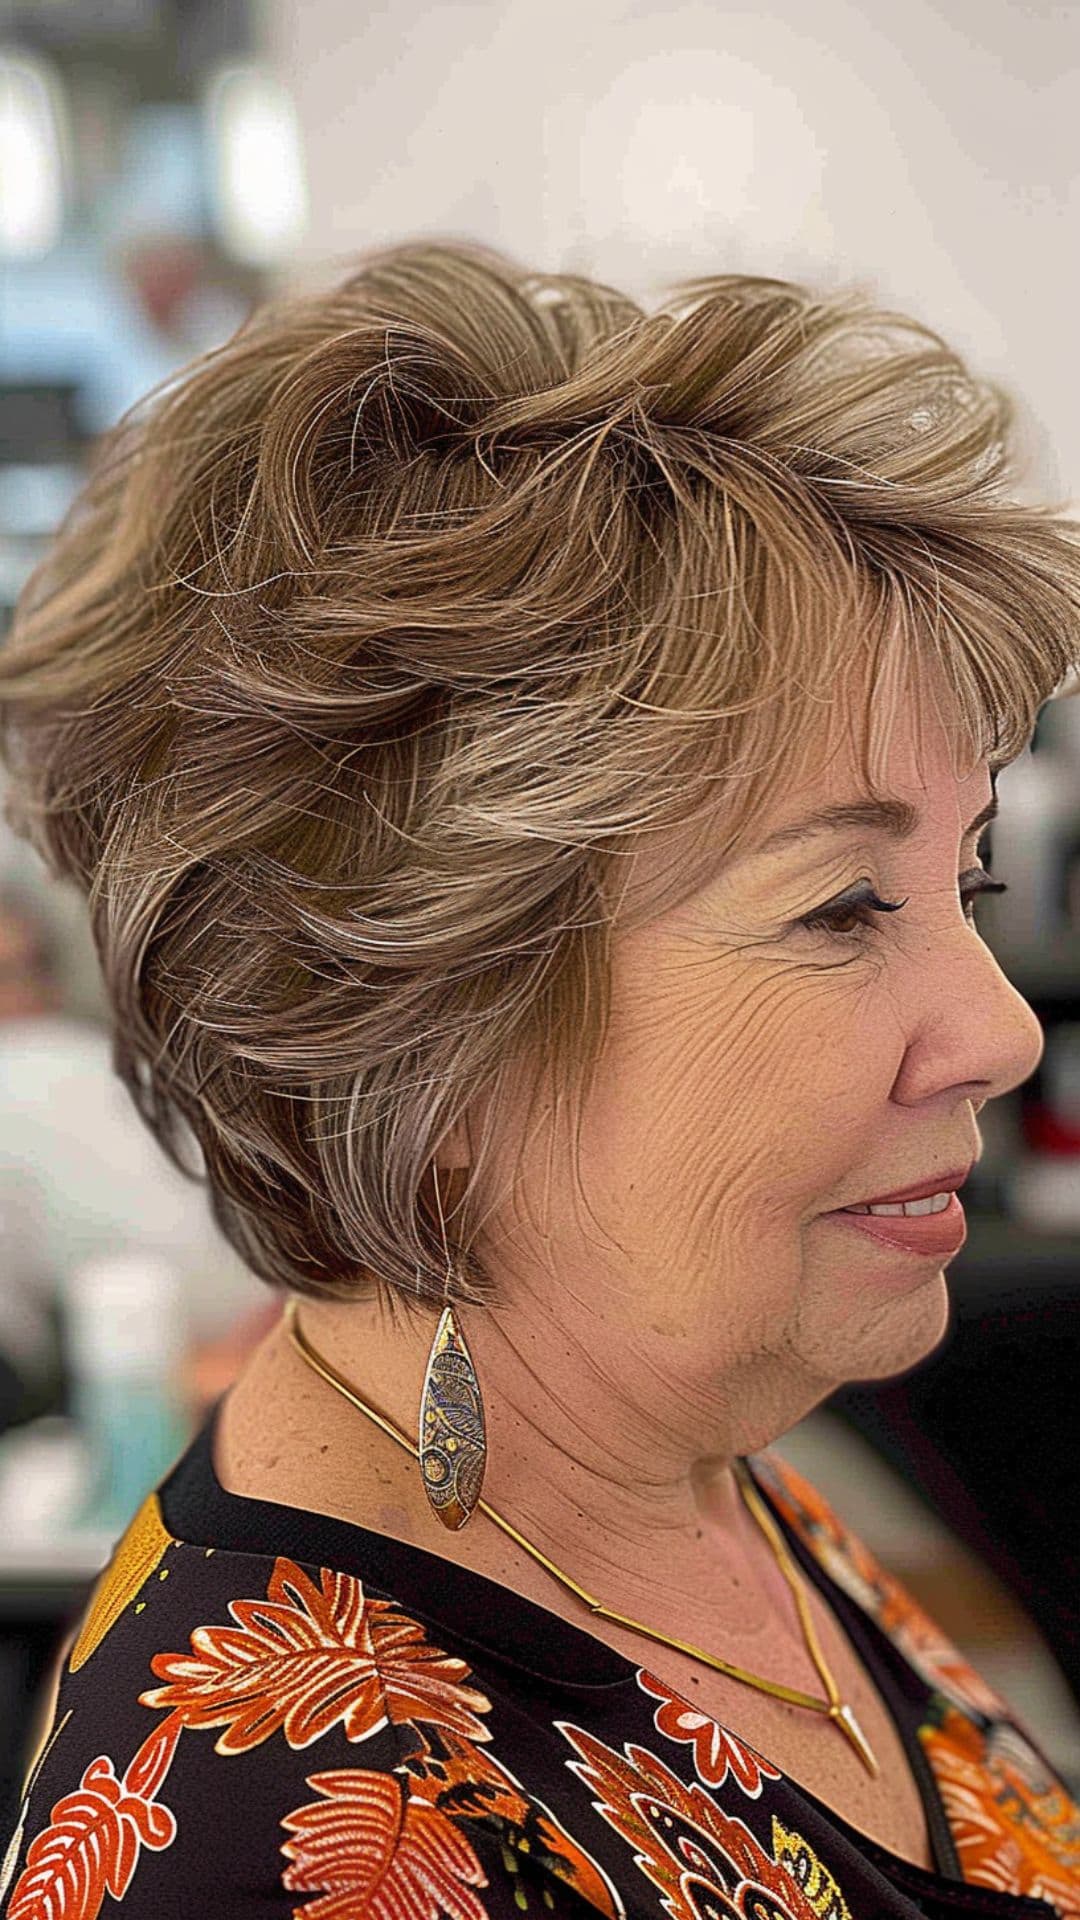 An old woman modelling a tousled pixied bob hair.